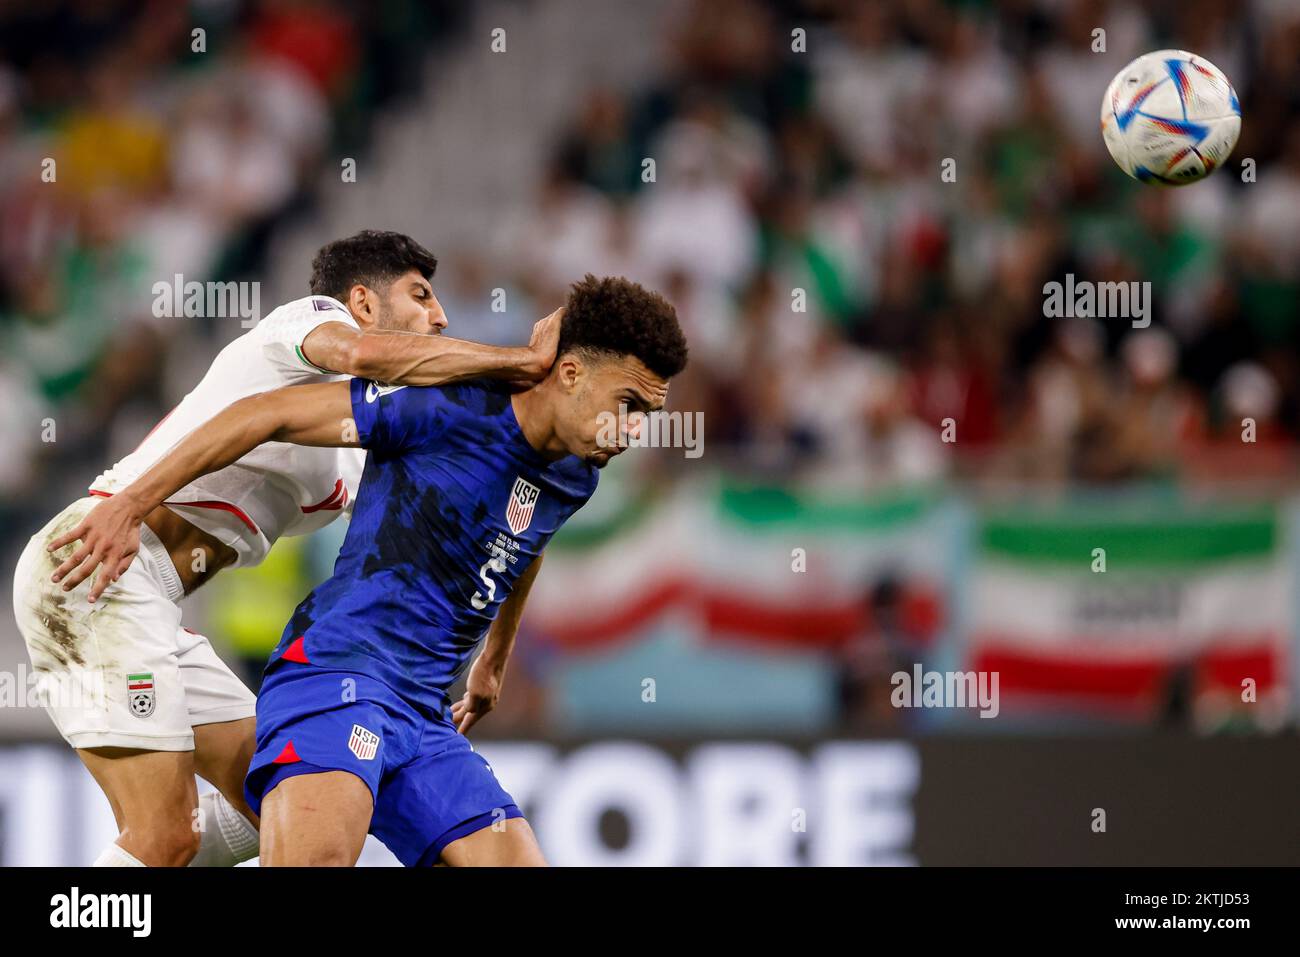 Doha, Catar. 29th Nov, 2022. TORABI Mehdi of Iran disputes the ball with ROBINSON Antonee of the United States during a match between Iran and the United States, valid for the group stage of the World Cup, held at Al Thumama Stadium in Doha, Qatar. Credit: Marcelo Machado de Melo/FotoArena/Alamy Live News Stock Photo